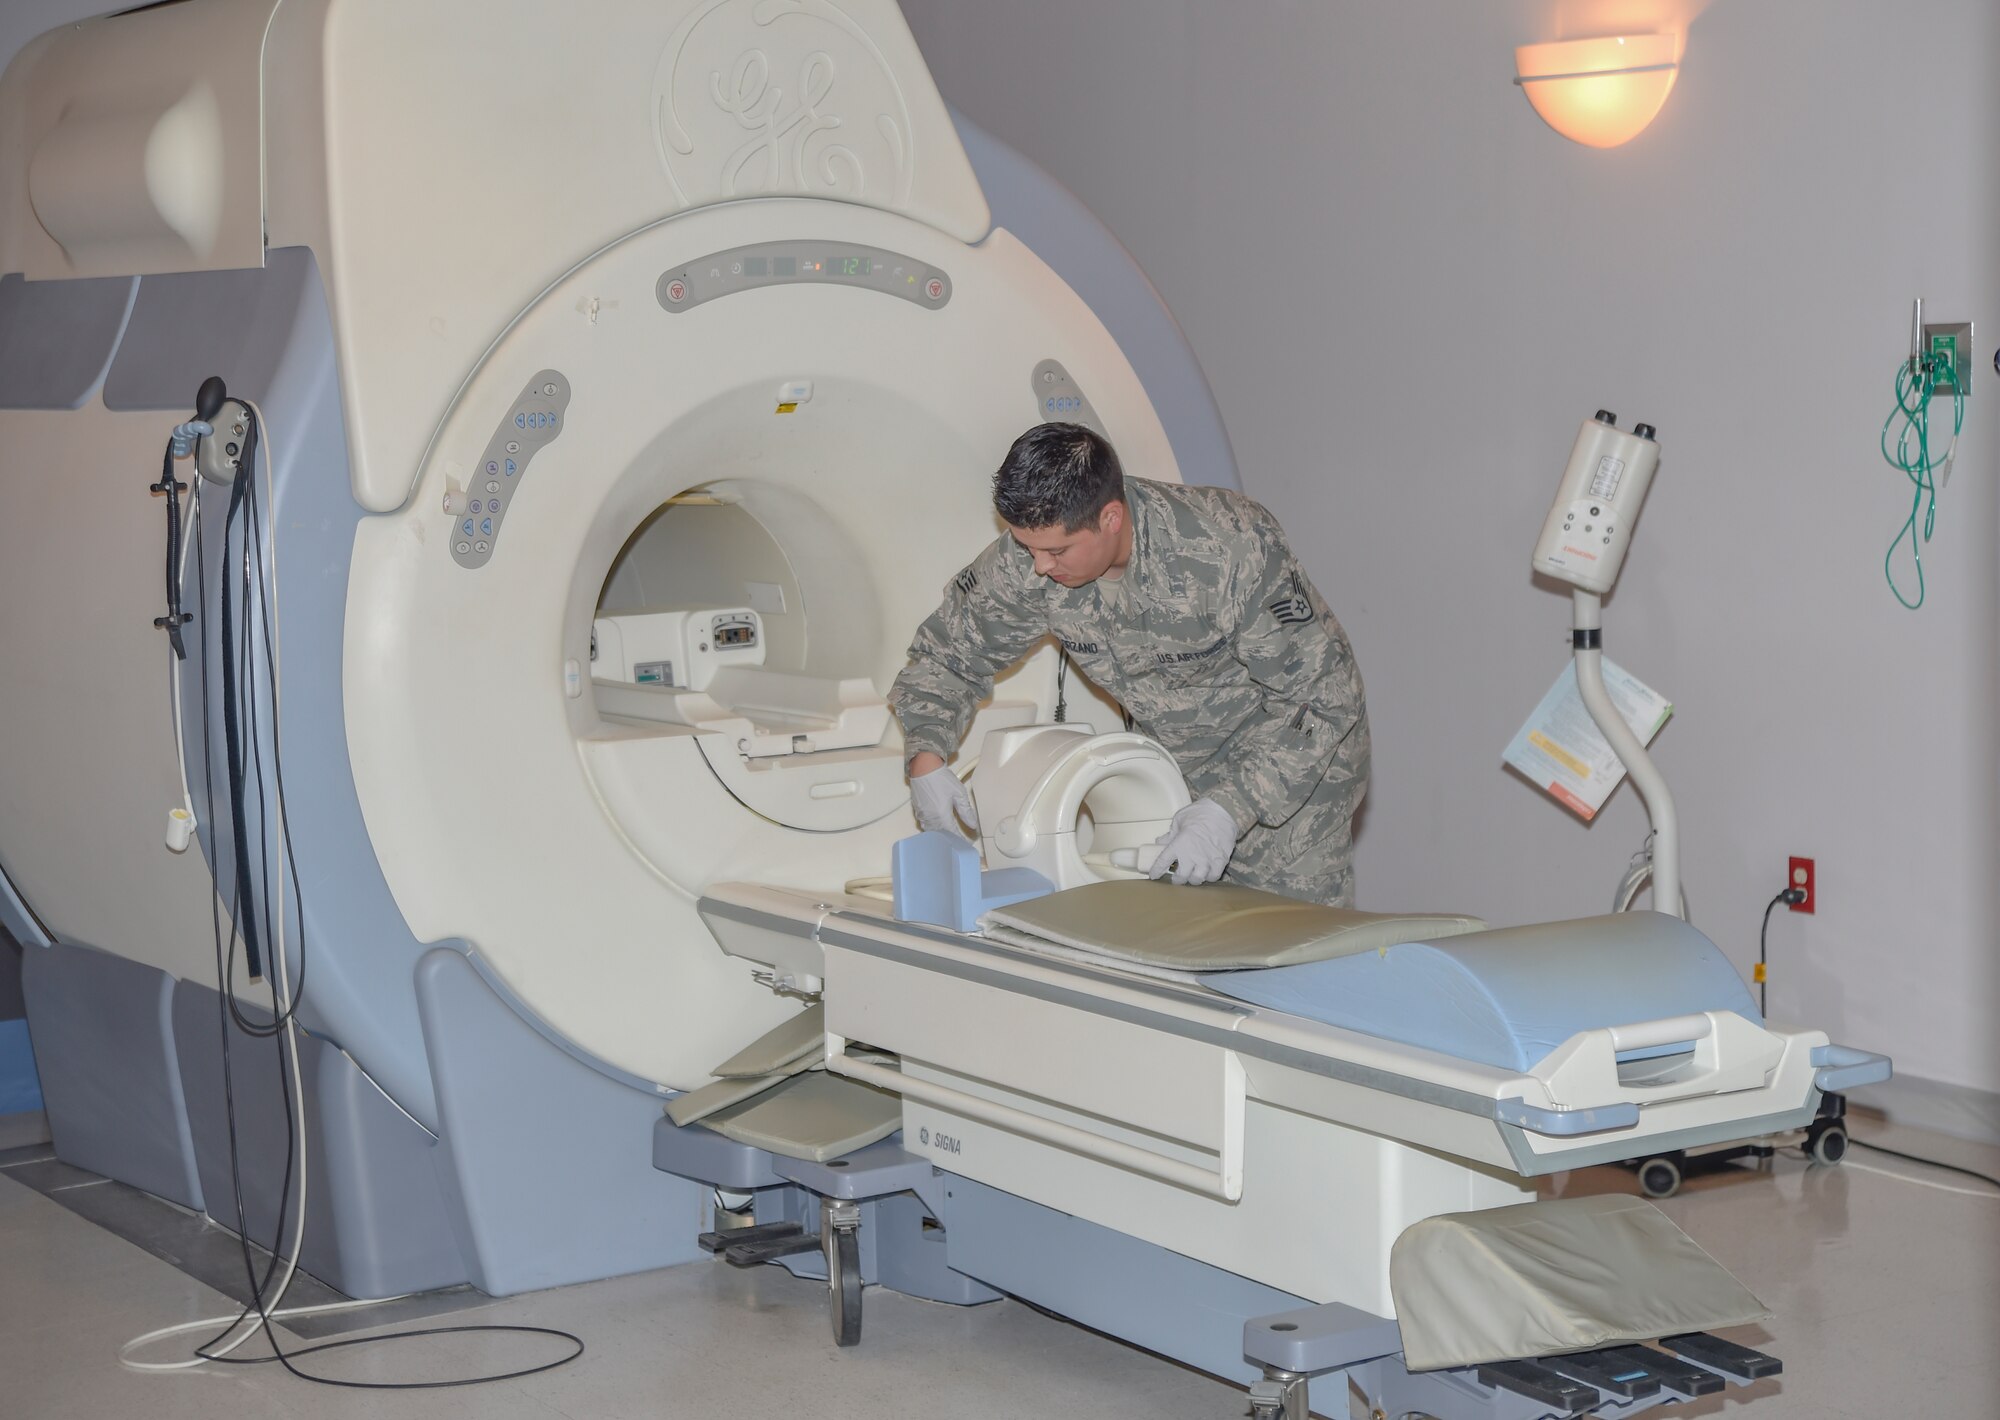 Staff Sgt. Adrian Solorzano, 779th Medical Group Magnetic Resonance Imaging section NCO in-charge, prepares the MRI machine for a patient at Malcolm Grow Medical Center on Joint Base Andrews, Md., March 17, 2016. MRIs can detect a variety of disorders, to include: brain deformities, injuries and musculoskeletal problems. (U.S. Air Force photo by Senior Airman Ryan J. Sonnier/RELEASED)
